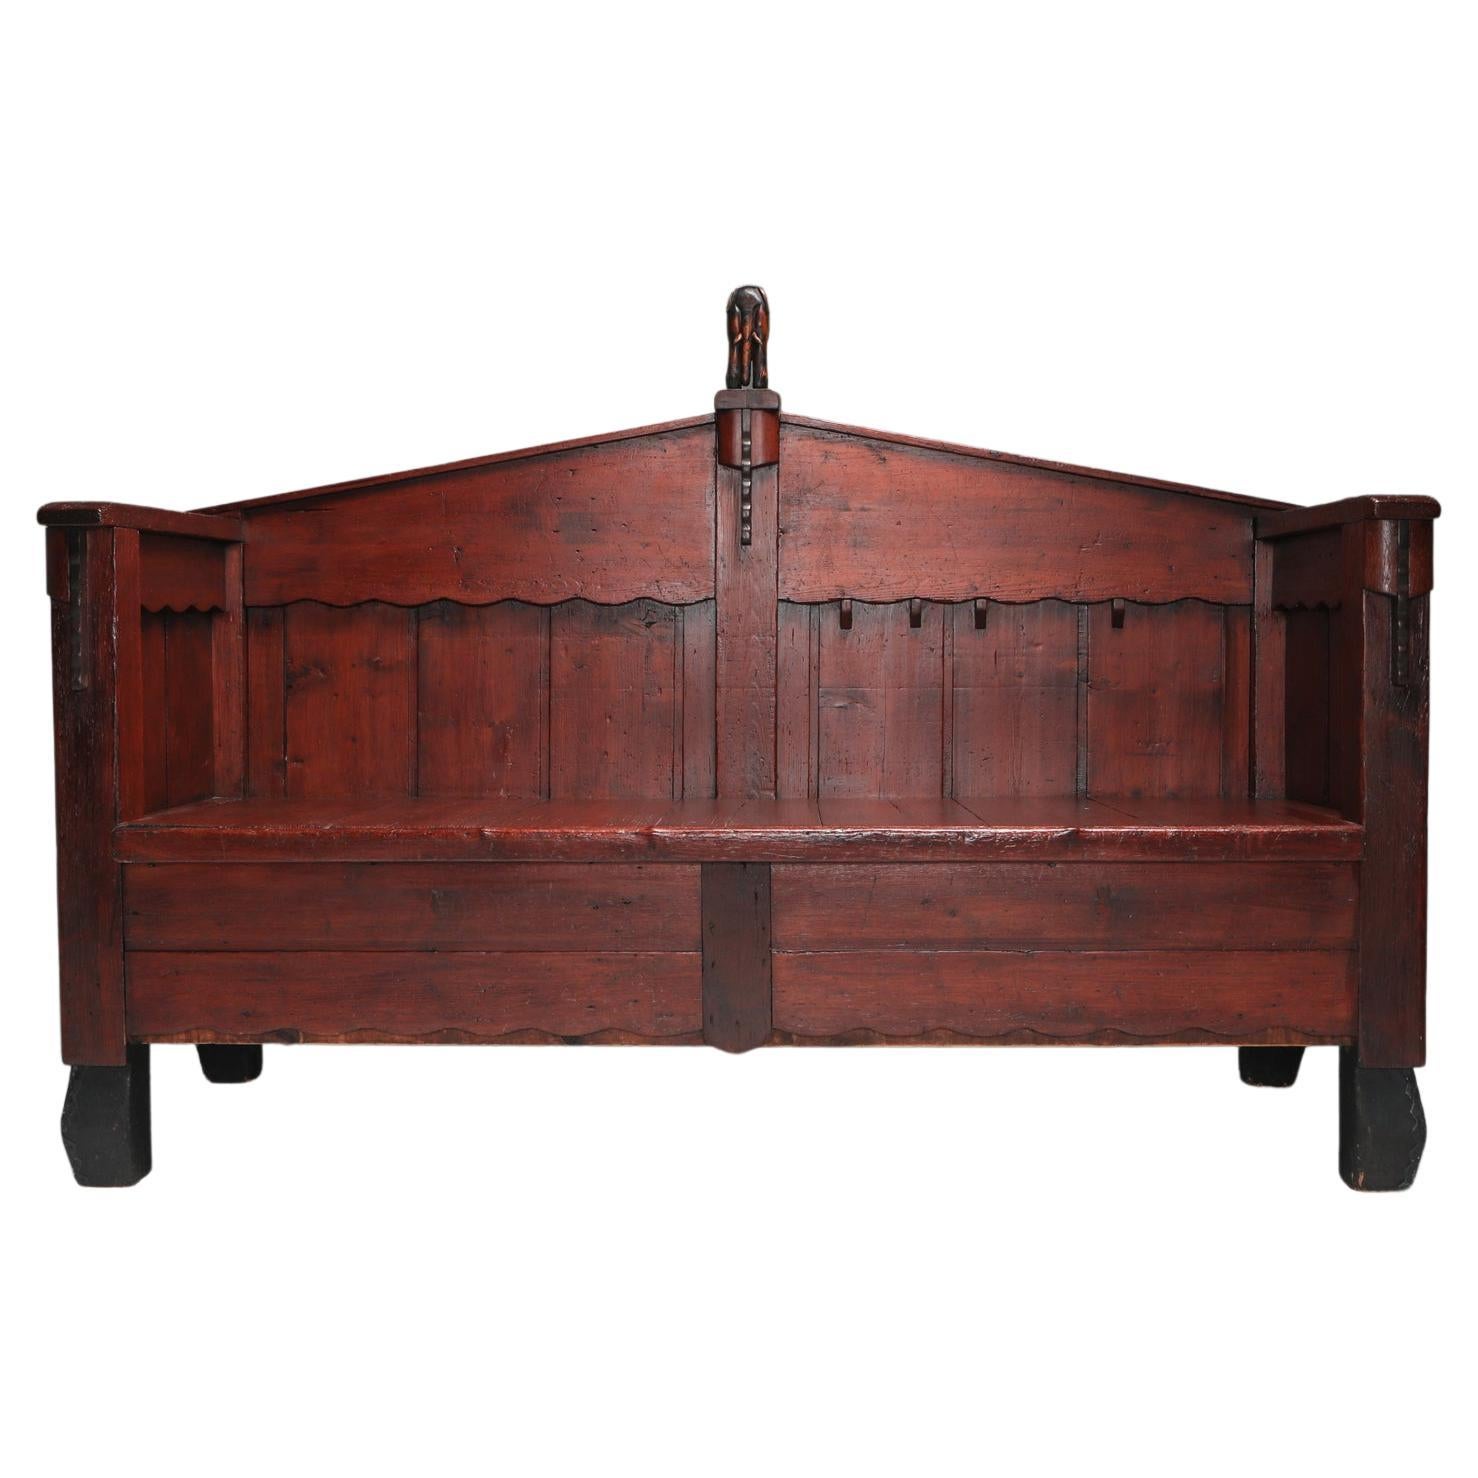 Expressionist Amsterdamse School Bench, in Pine, 1920s For Sale